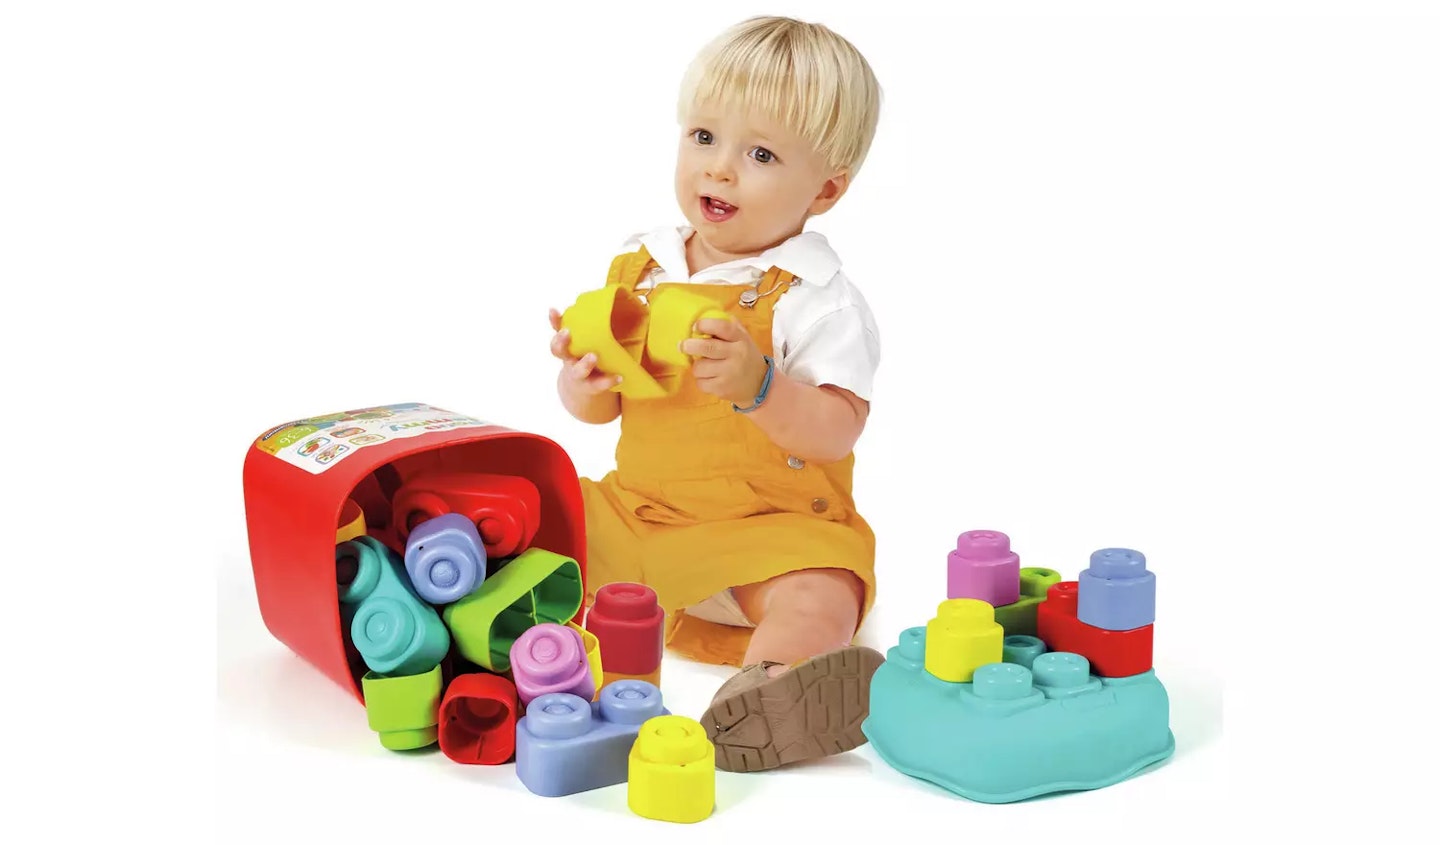 Baby boy playing with soft blocks 